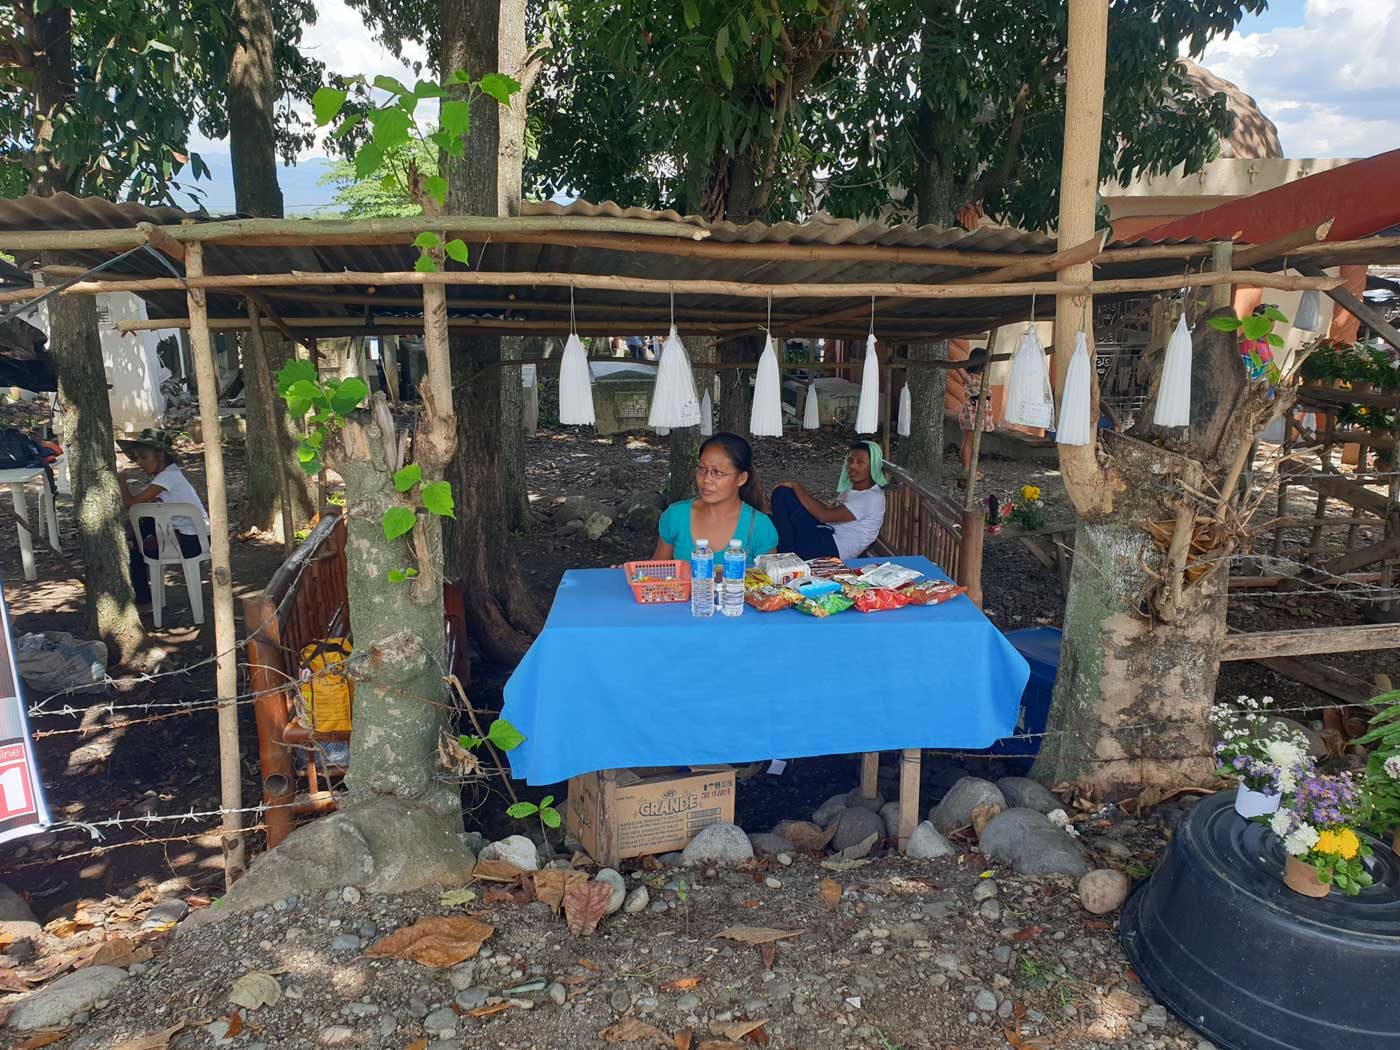 SLOW BUSINESS. Amie remotigue tends her store beside the Magsaysay cemetery in Davao del Sur.